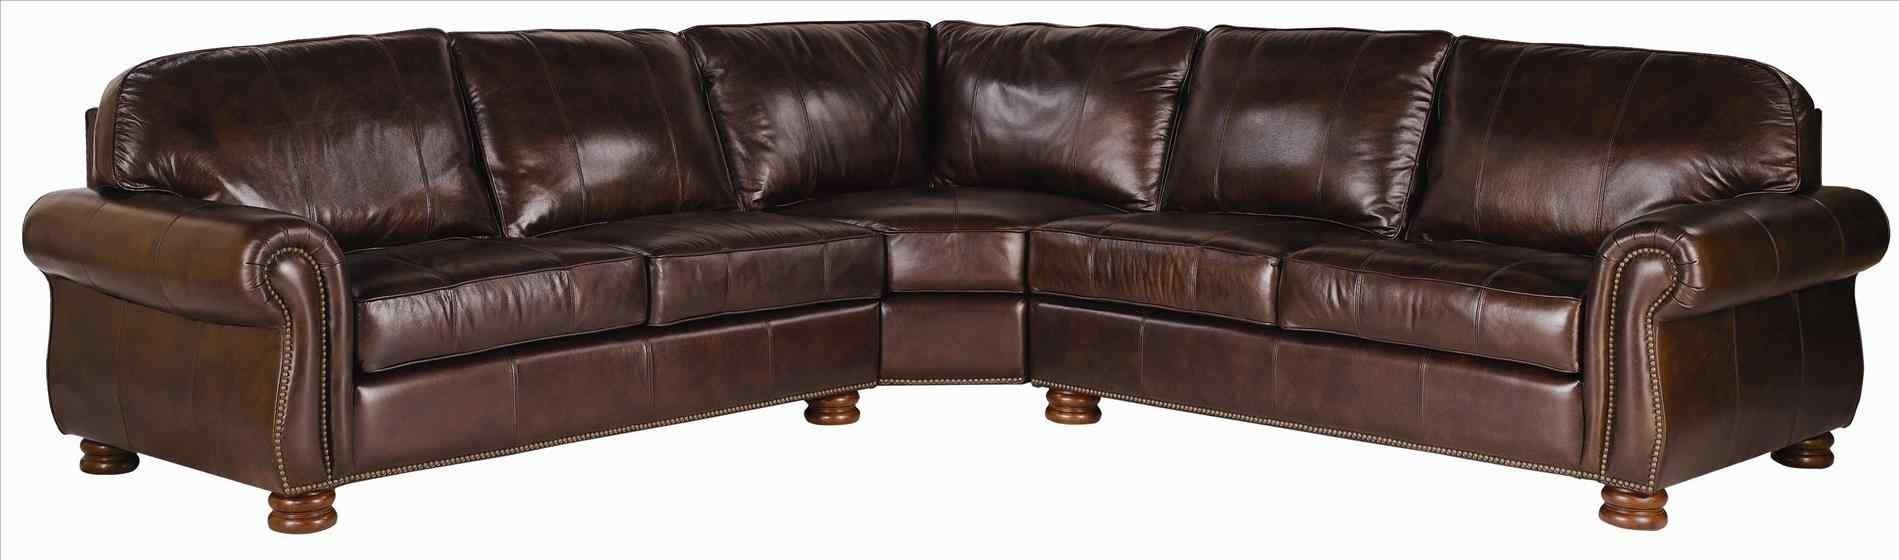 The Images Collection Of U Thomasville Furniture Sectionals Global For Thomasville Sectional Sofas (View 4 of 10)